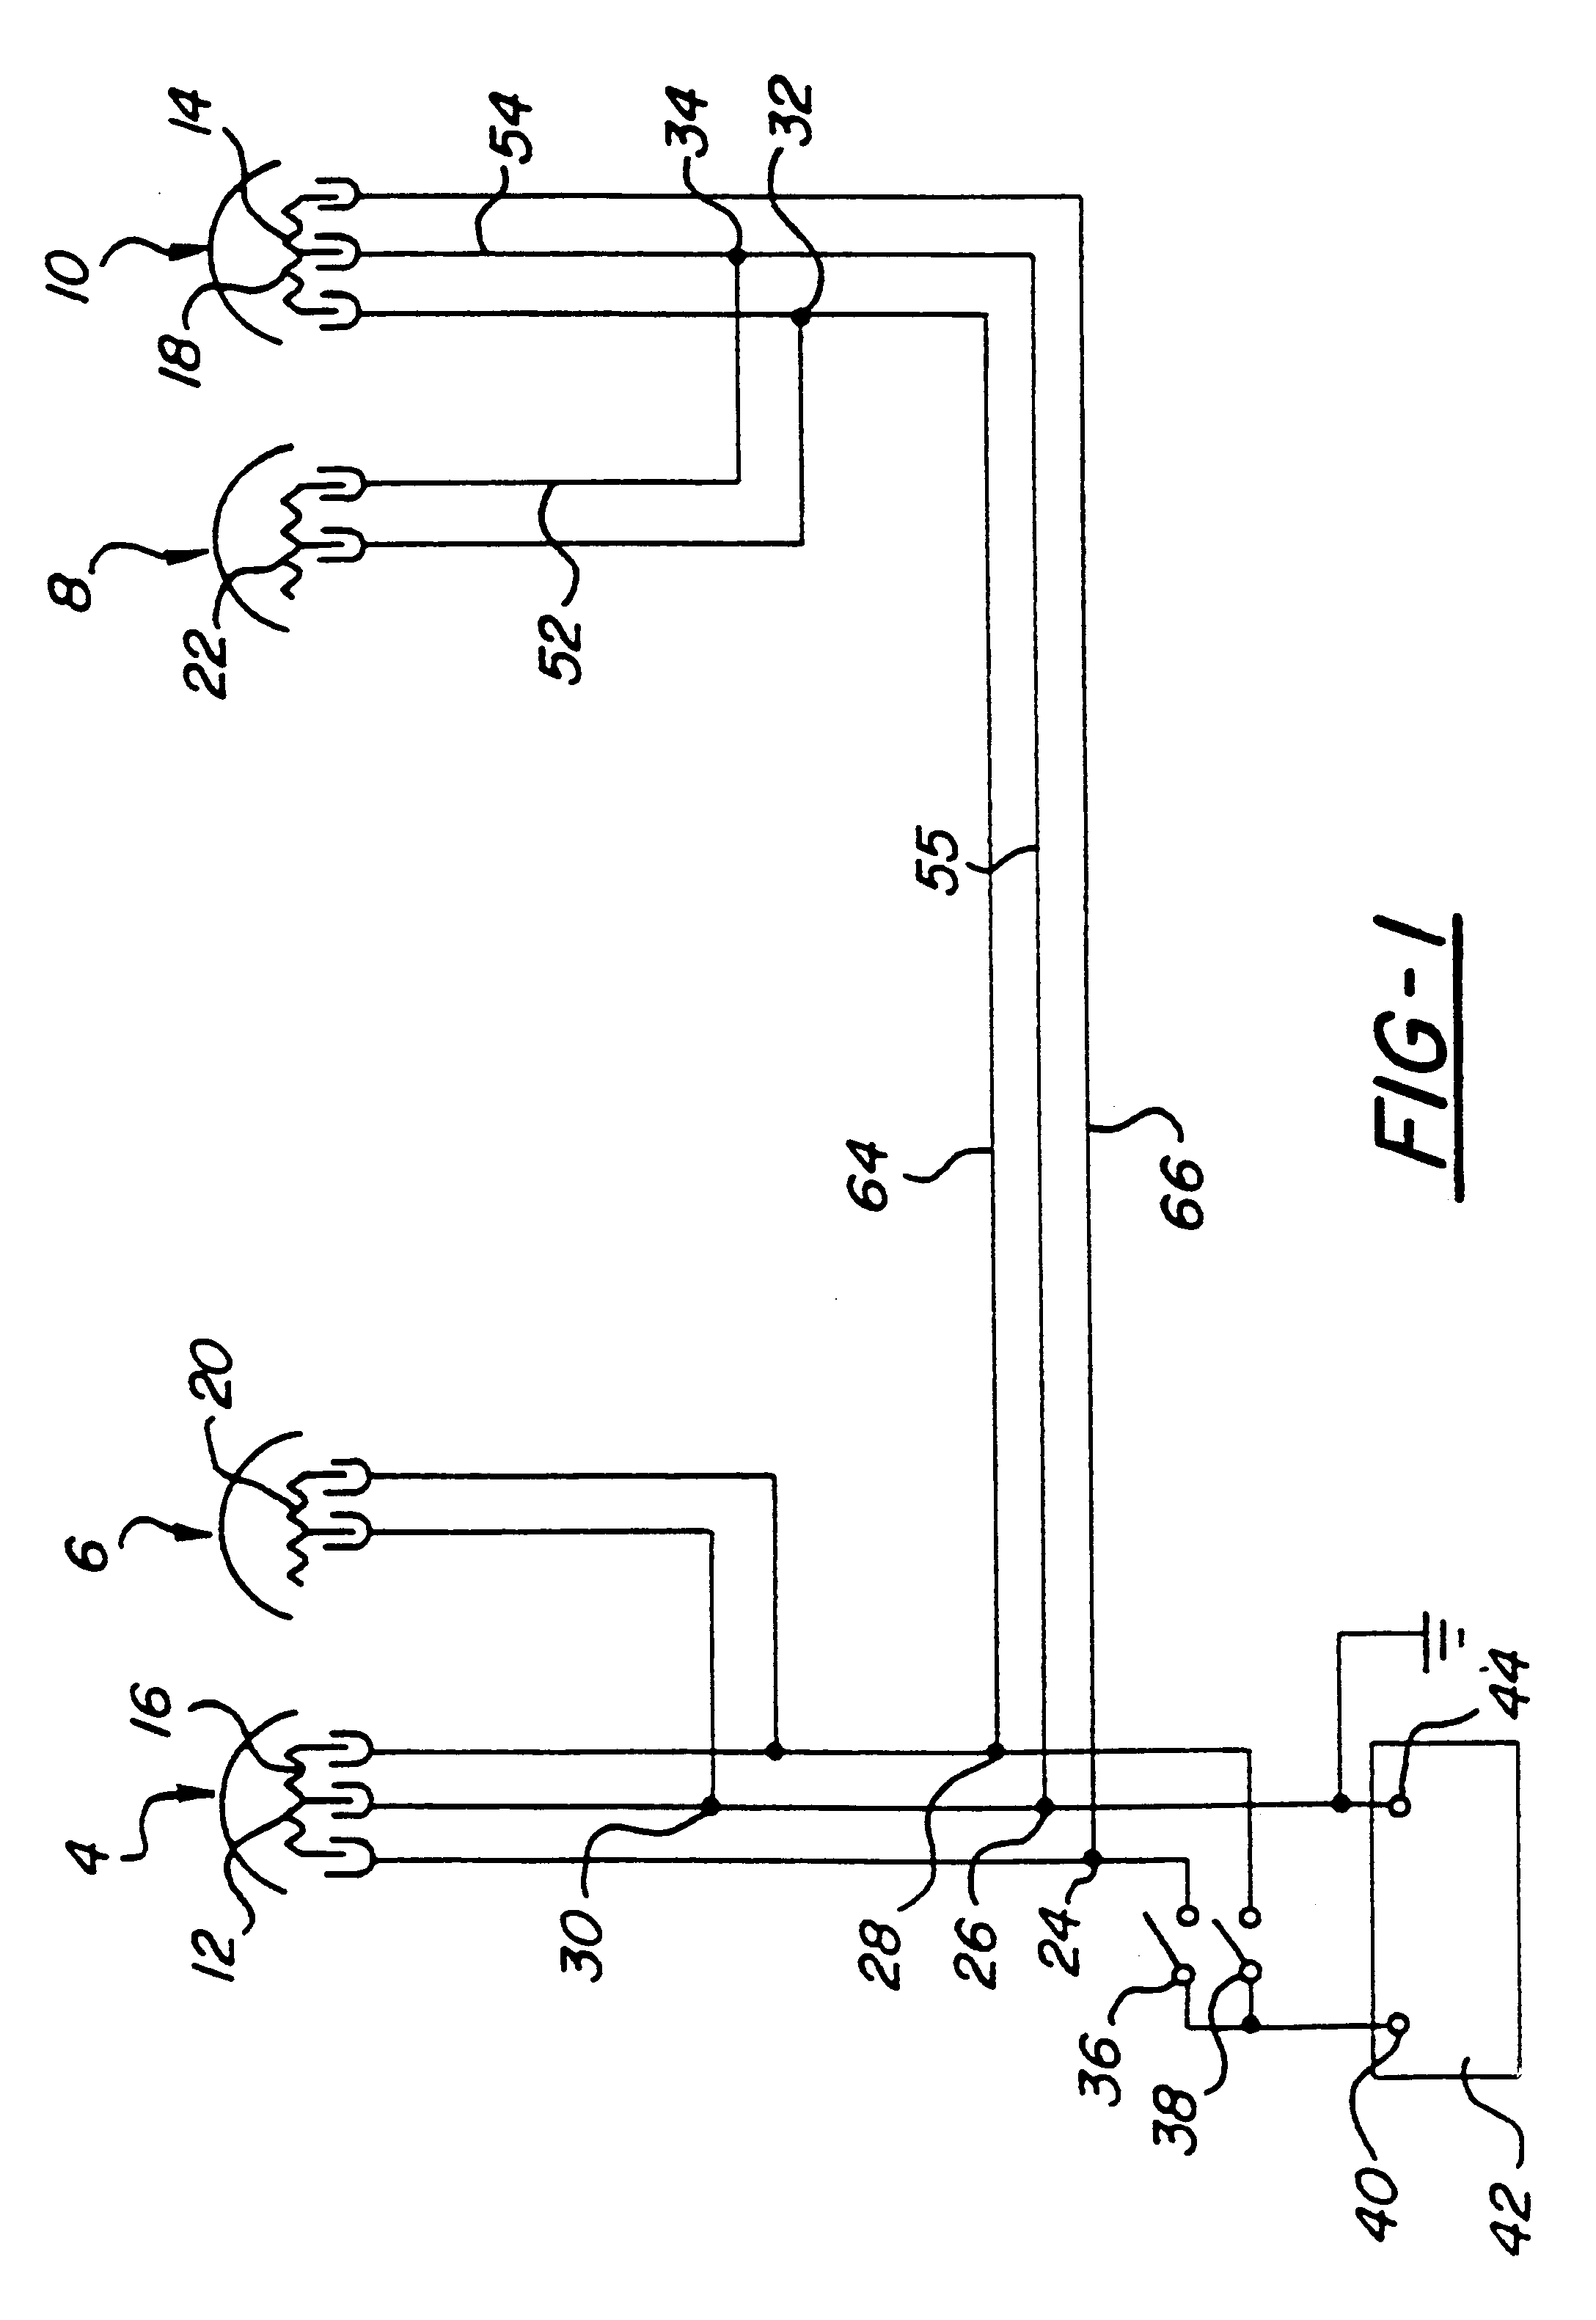 Electrical system for vehicle daytime running lights